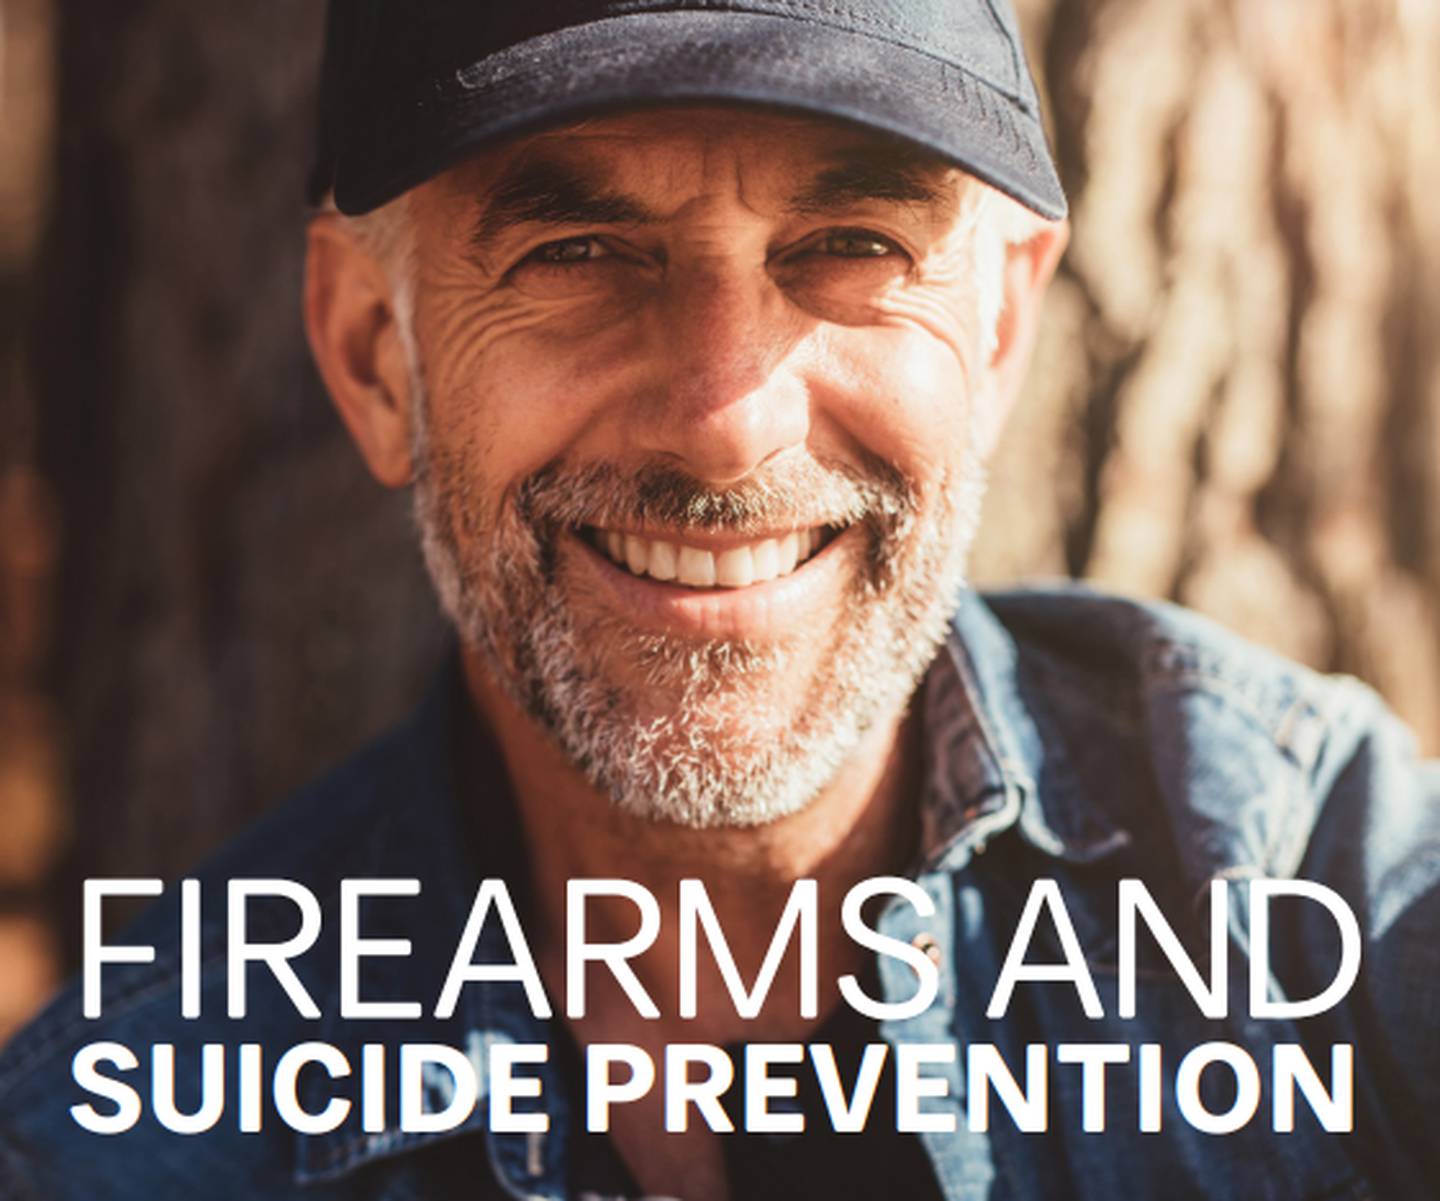 A federal judge has ruled a pamphlet developed by Anne Arundel County, along with the American Foundation for Suicide Prevention and the National Shooting Sports Foundation, can be required at businesses that sell guns or ammunition.